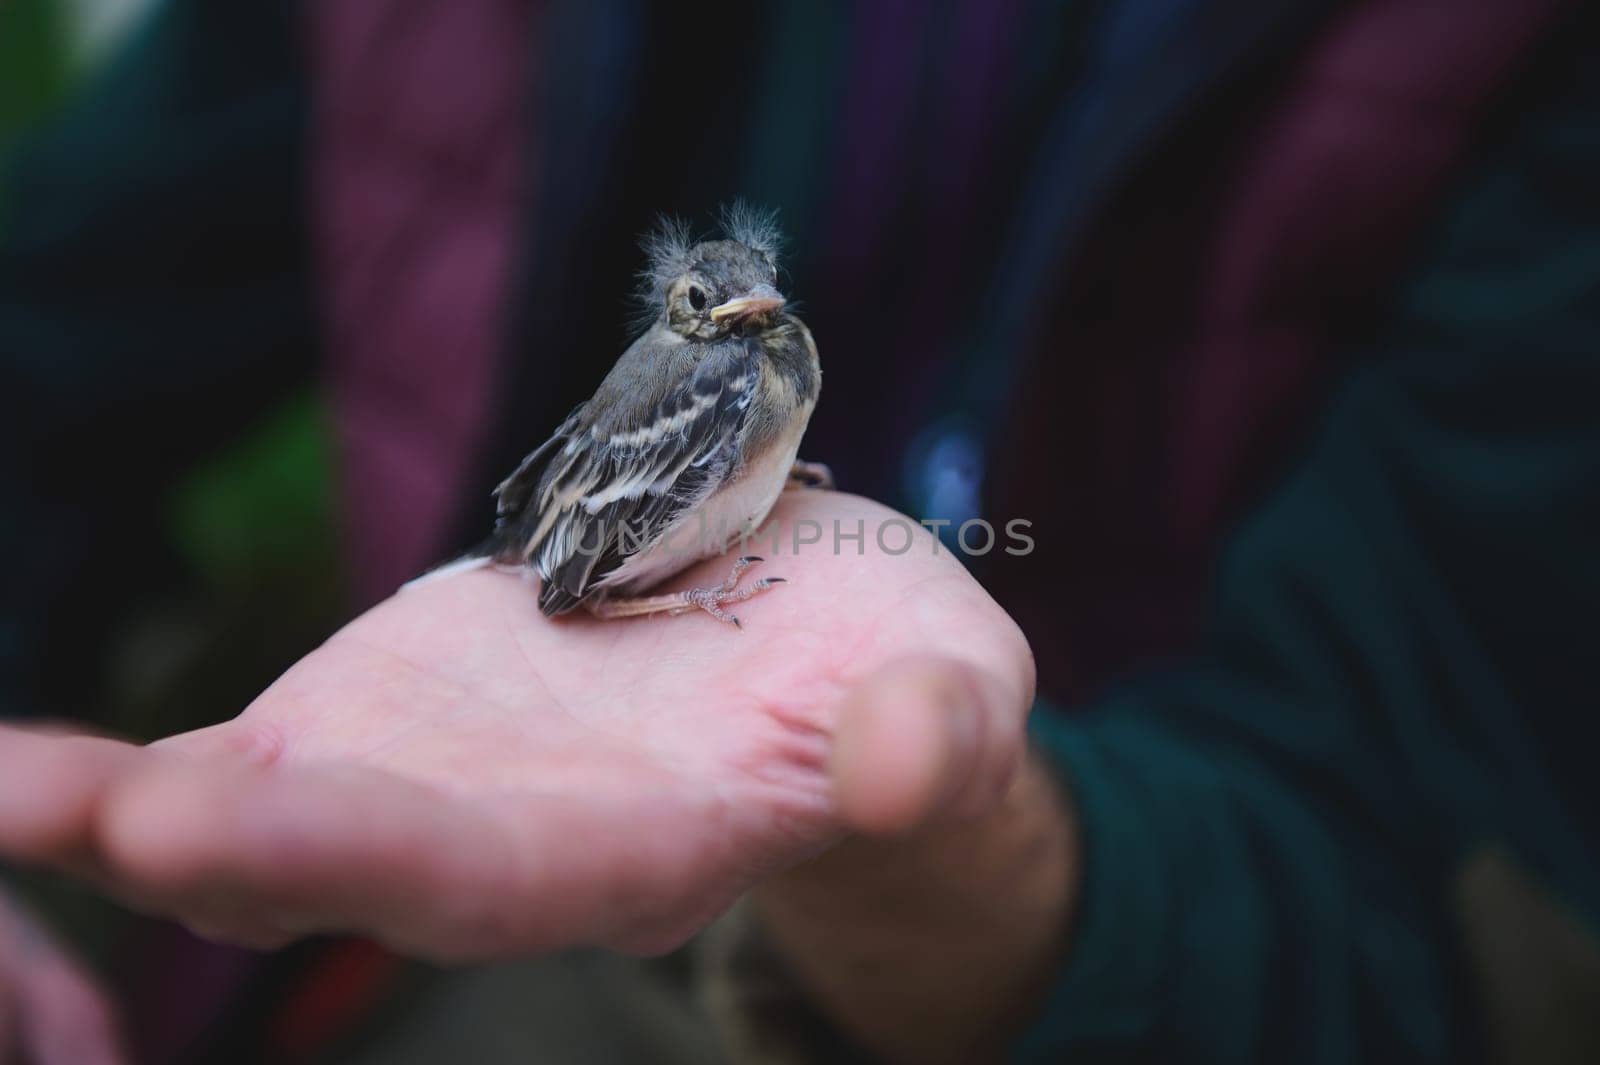 People and animals themes. Close-up view of a small baby bird sitting in the hands of a man. by artgf